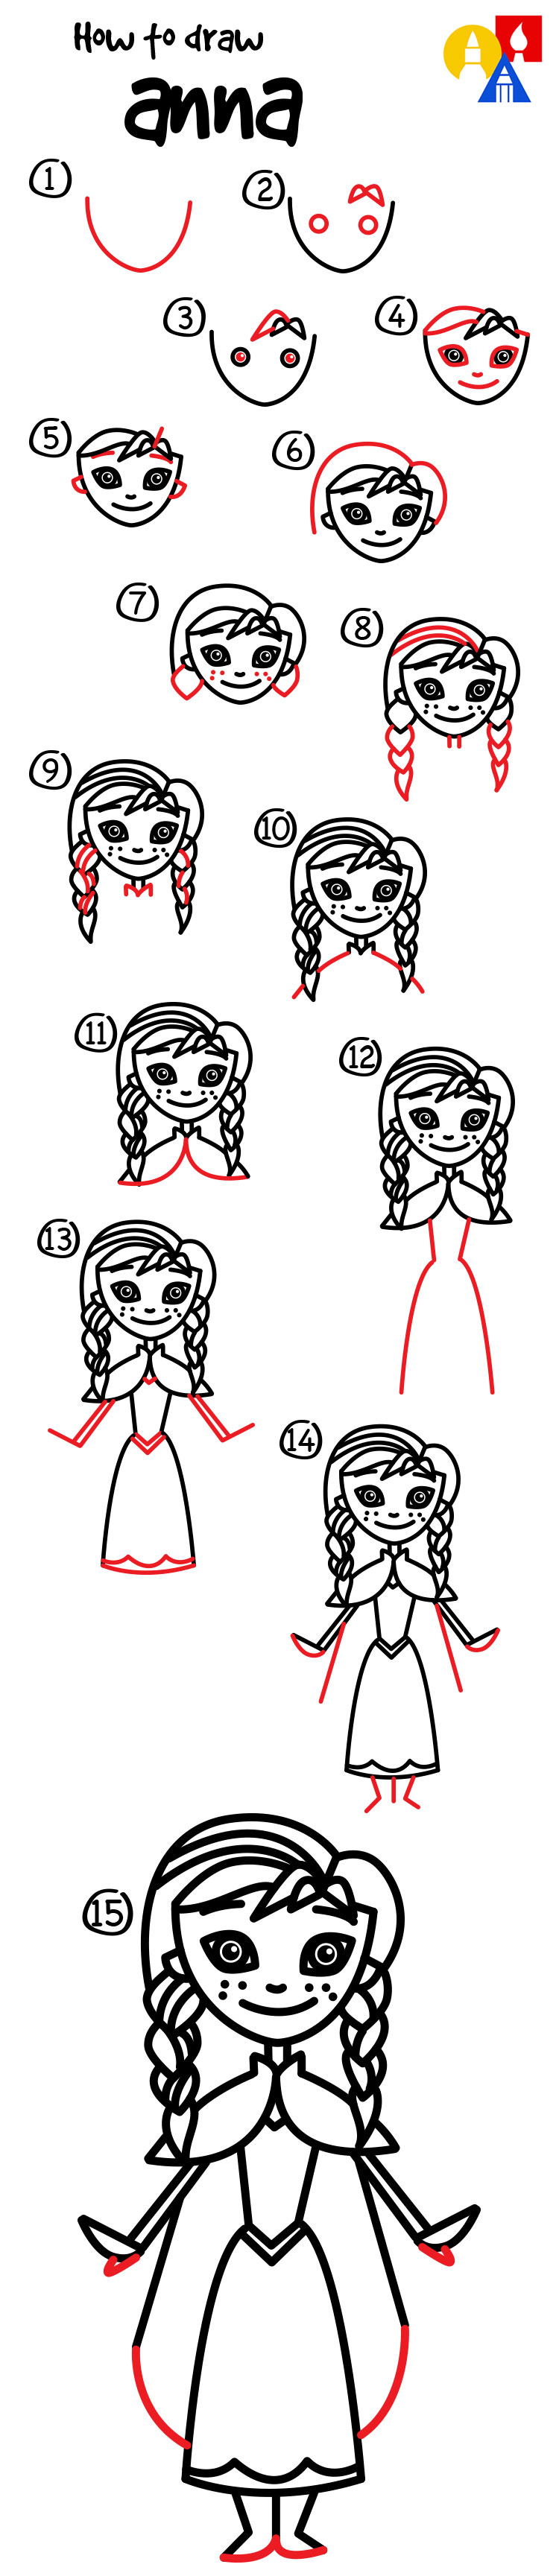 How To Draw Anna From Frozen - Art For Kids Hub